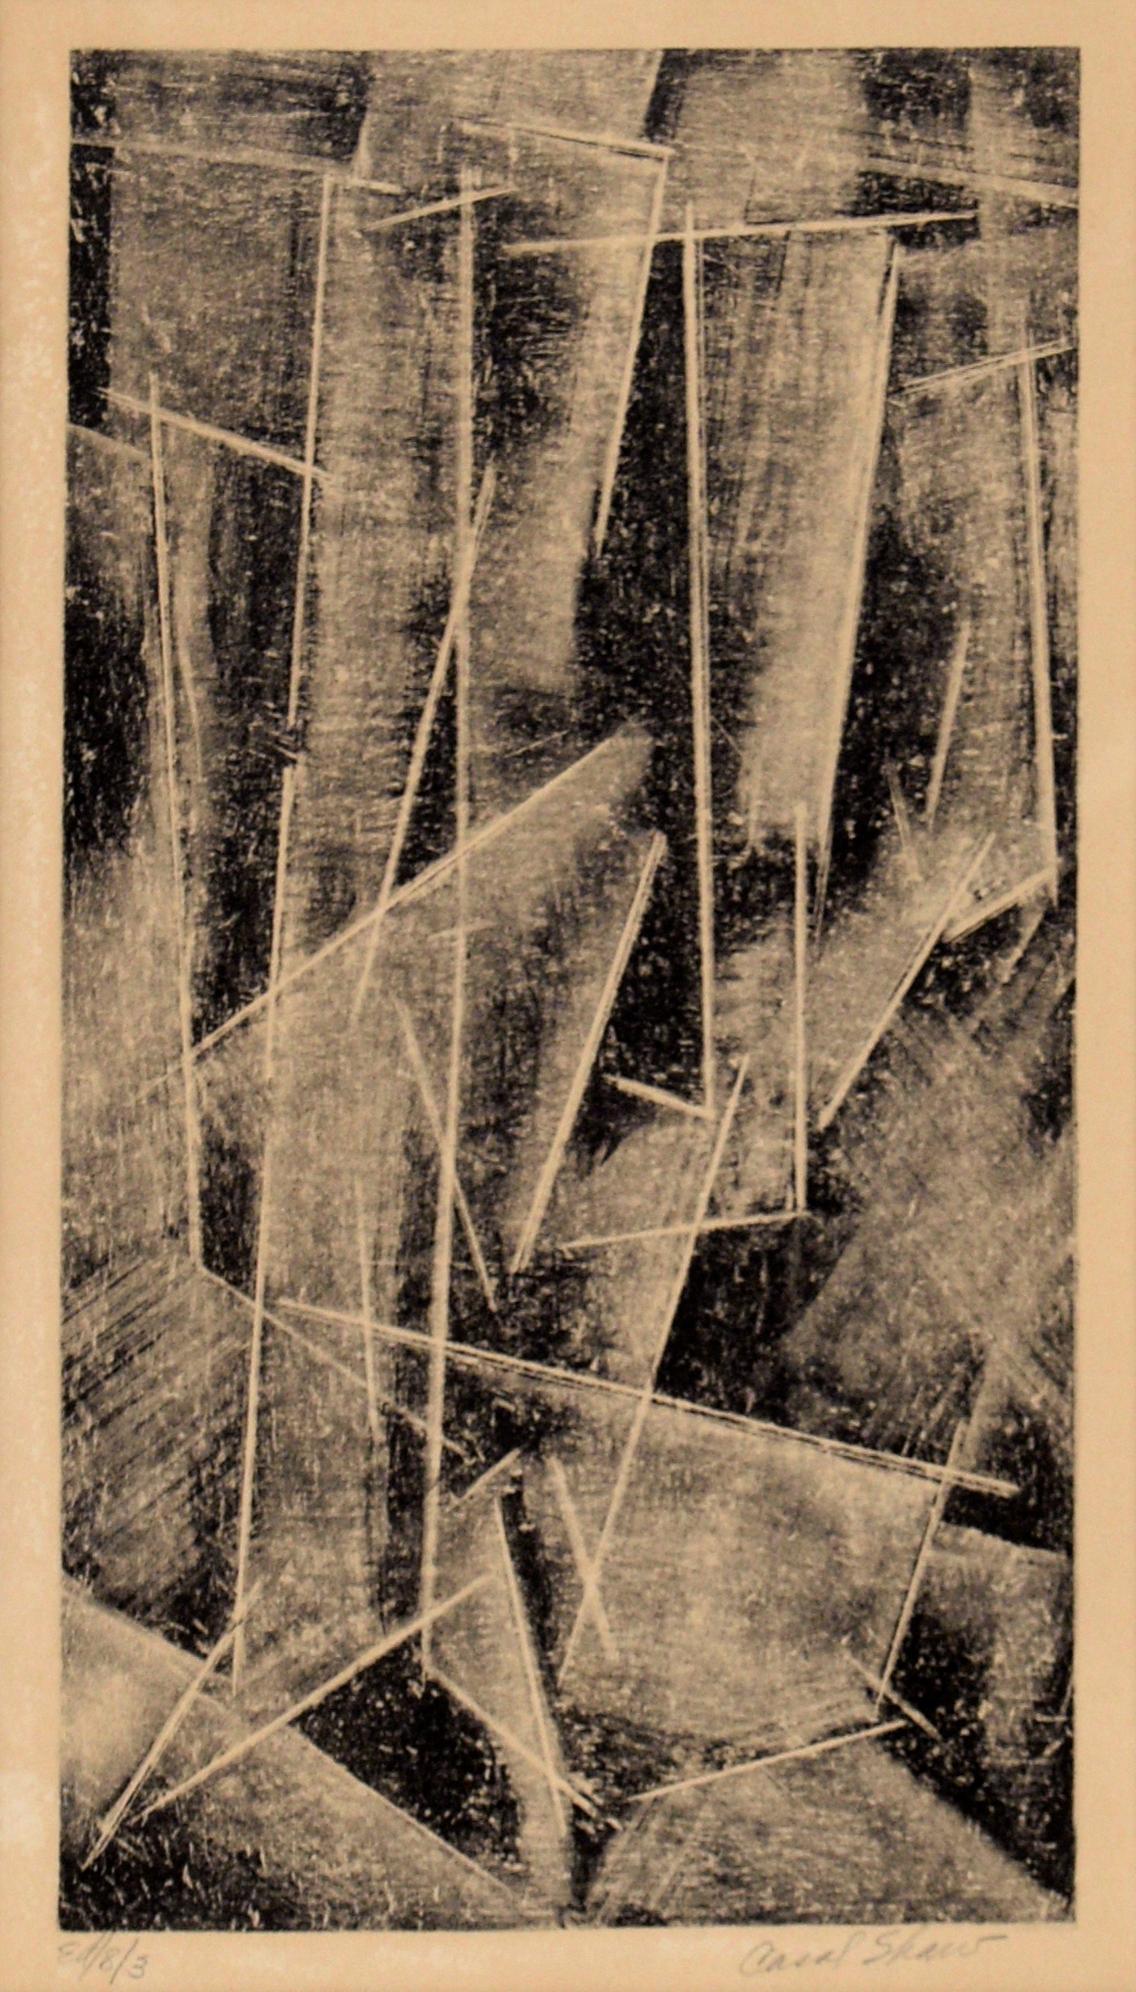 Bold geometric abstract etching by Carol Shaw (20th Century). Sharp lines - created with the use of negative space - divide the composition into sections, with shading between them. The shading creates a sense of depth and three-dimensional